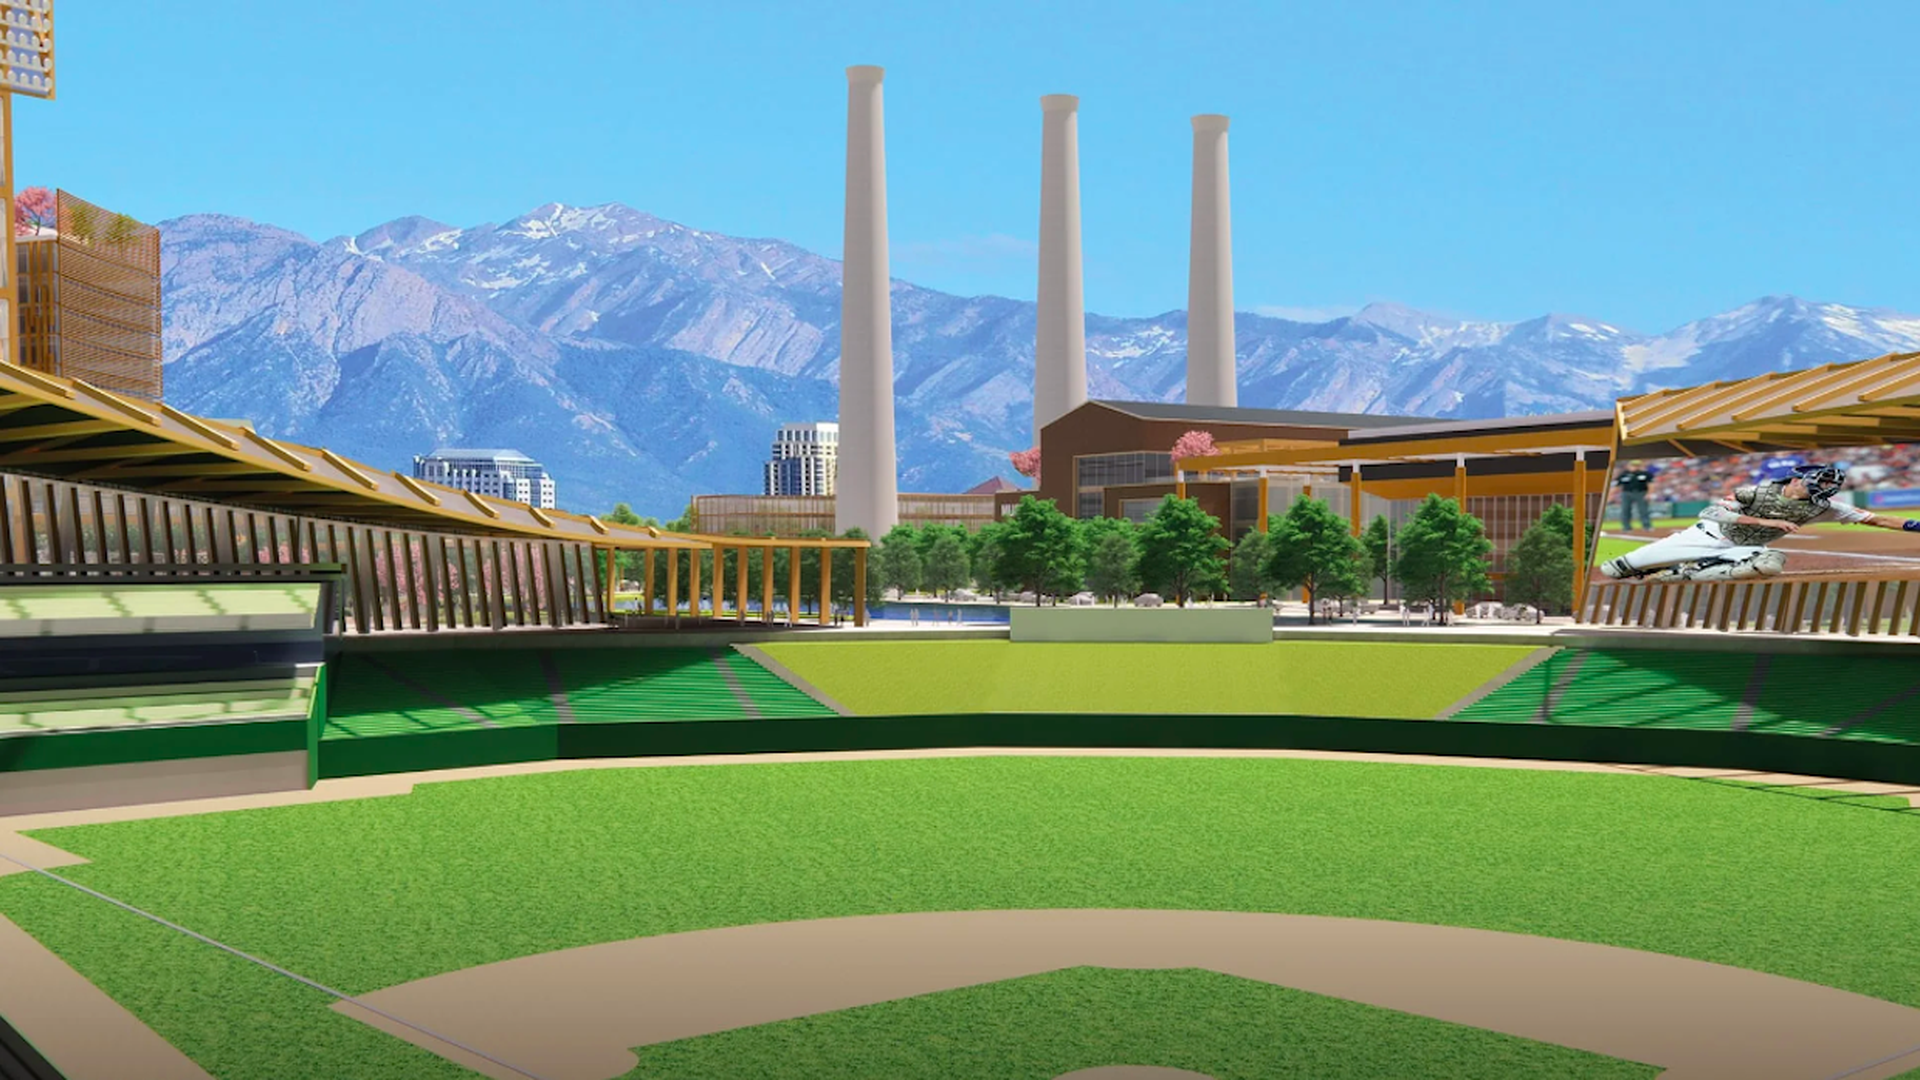 An illustration of a proposed baseball stadium with refinery towers and mountains in the background.